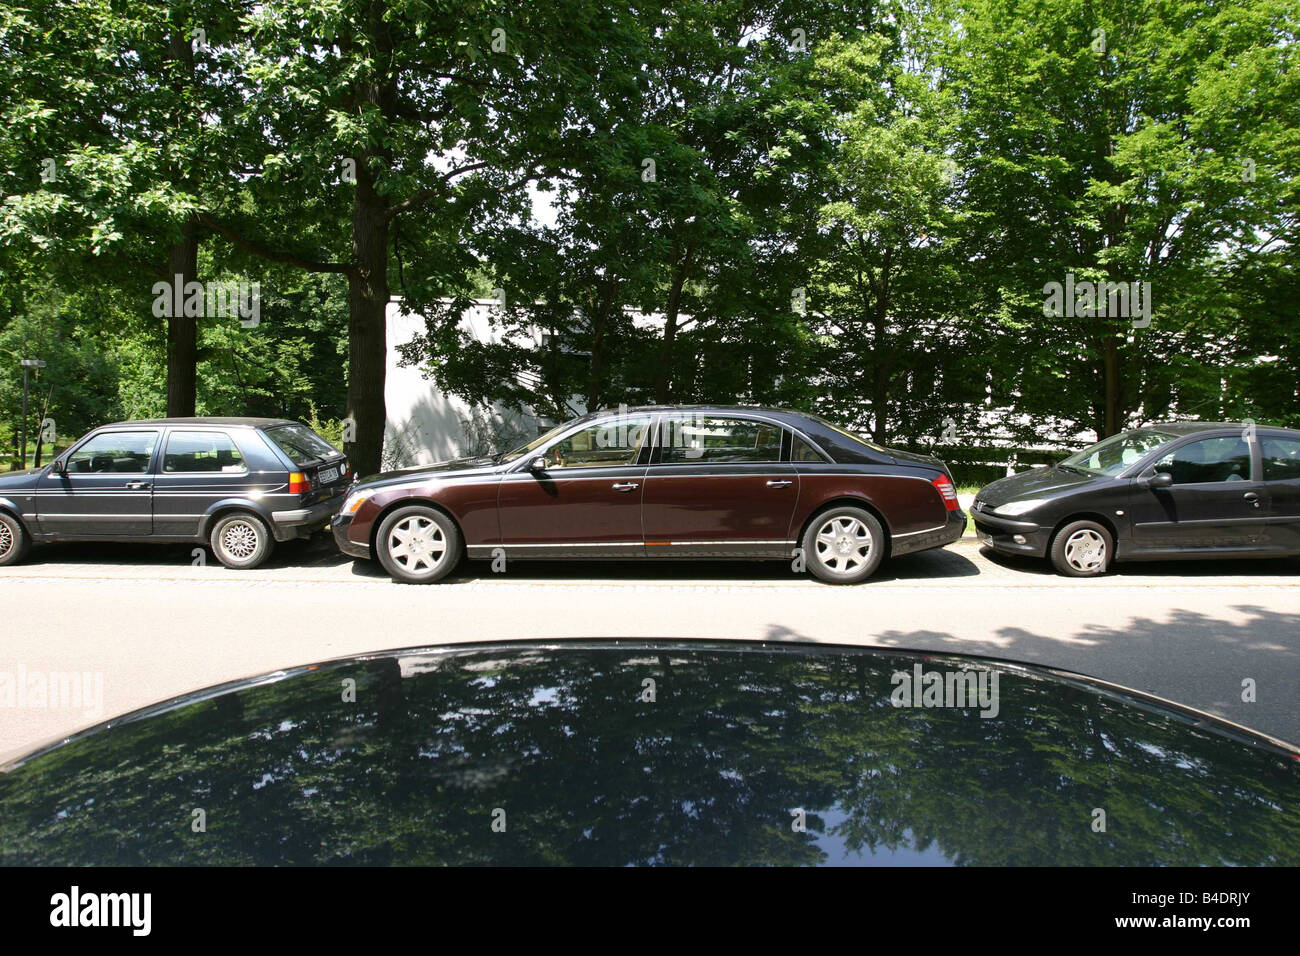 Car, Mercedes Maybach 62, Luxury approx.s, black, model year 2003-, 550 PS, € 418.000,--, standing, upholding, City, side view, Stock Photo